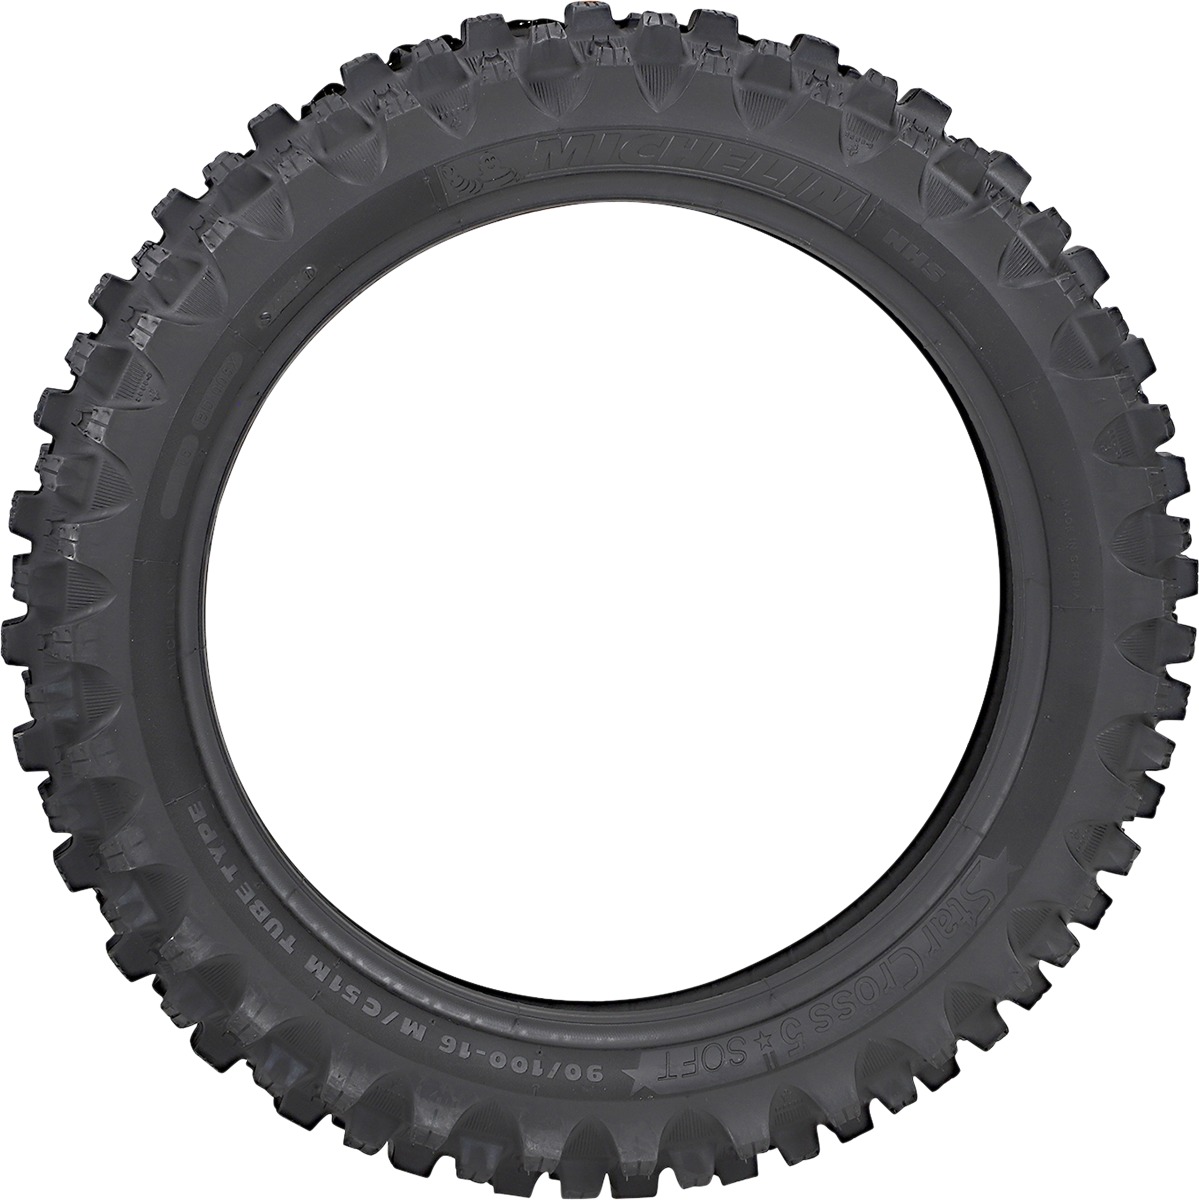 90/100-16 StarCross 5 Soft Rear Motorcycle Tire - TT - Click Image to Close